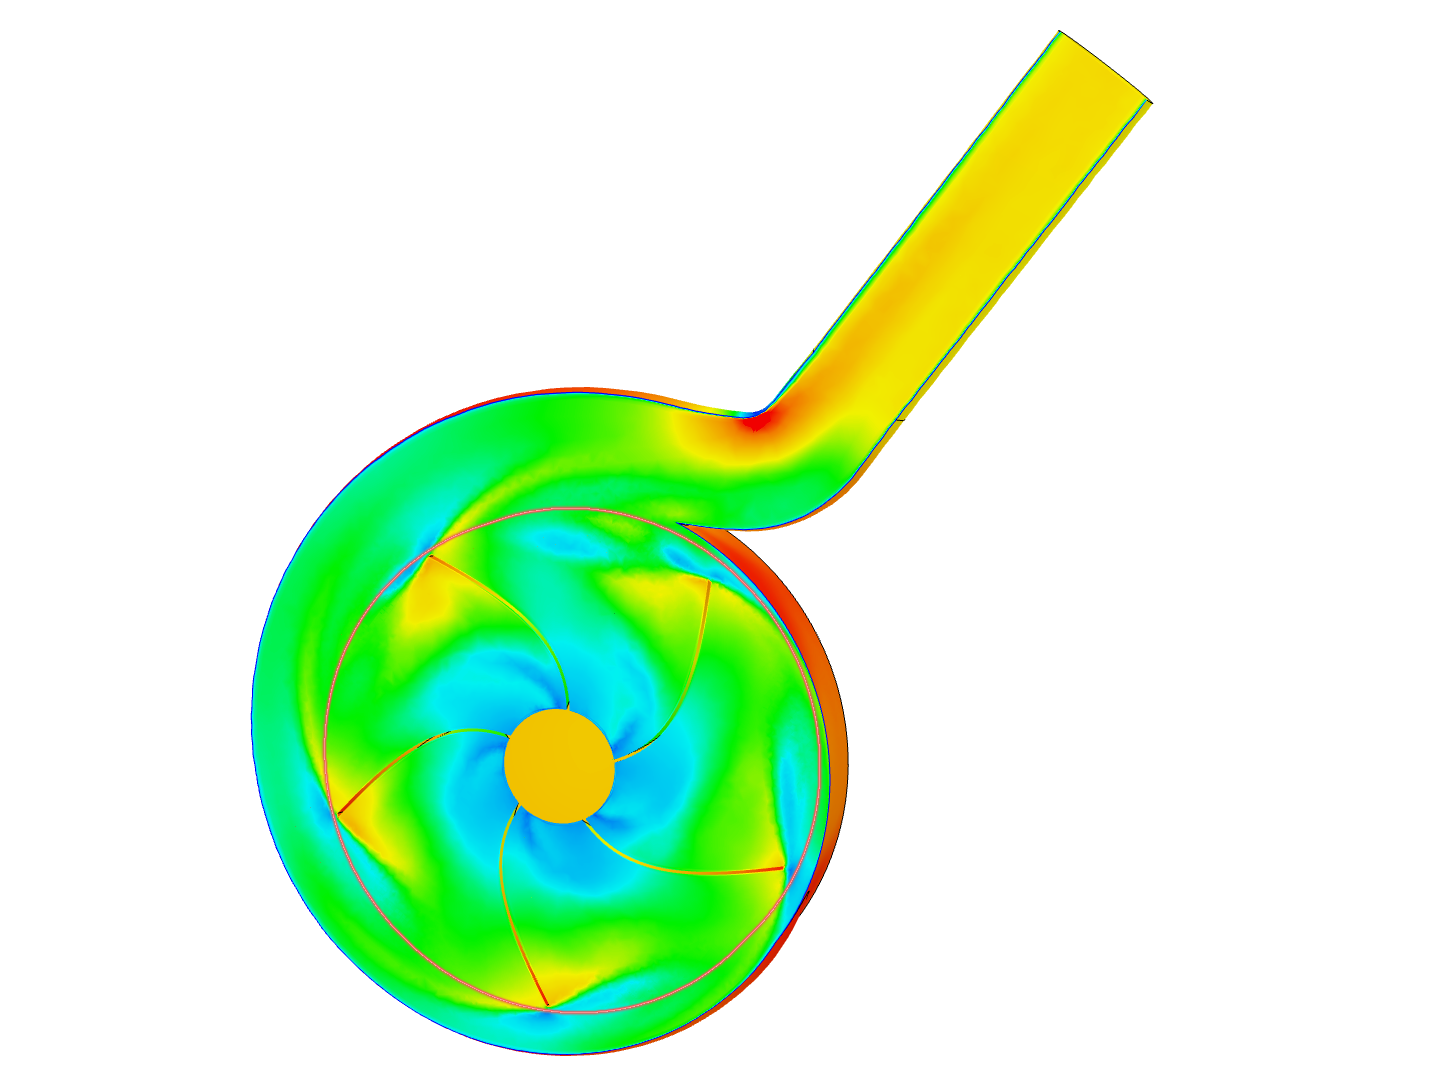 cfd of centrifugal pump image